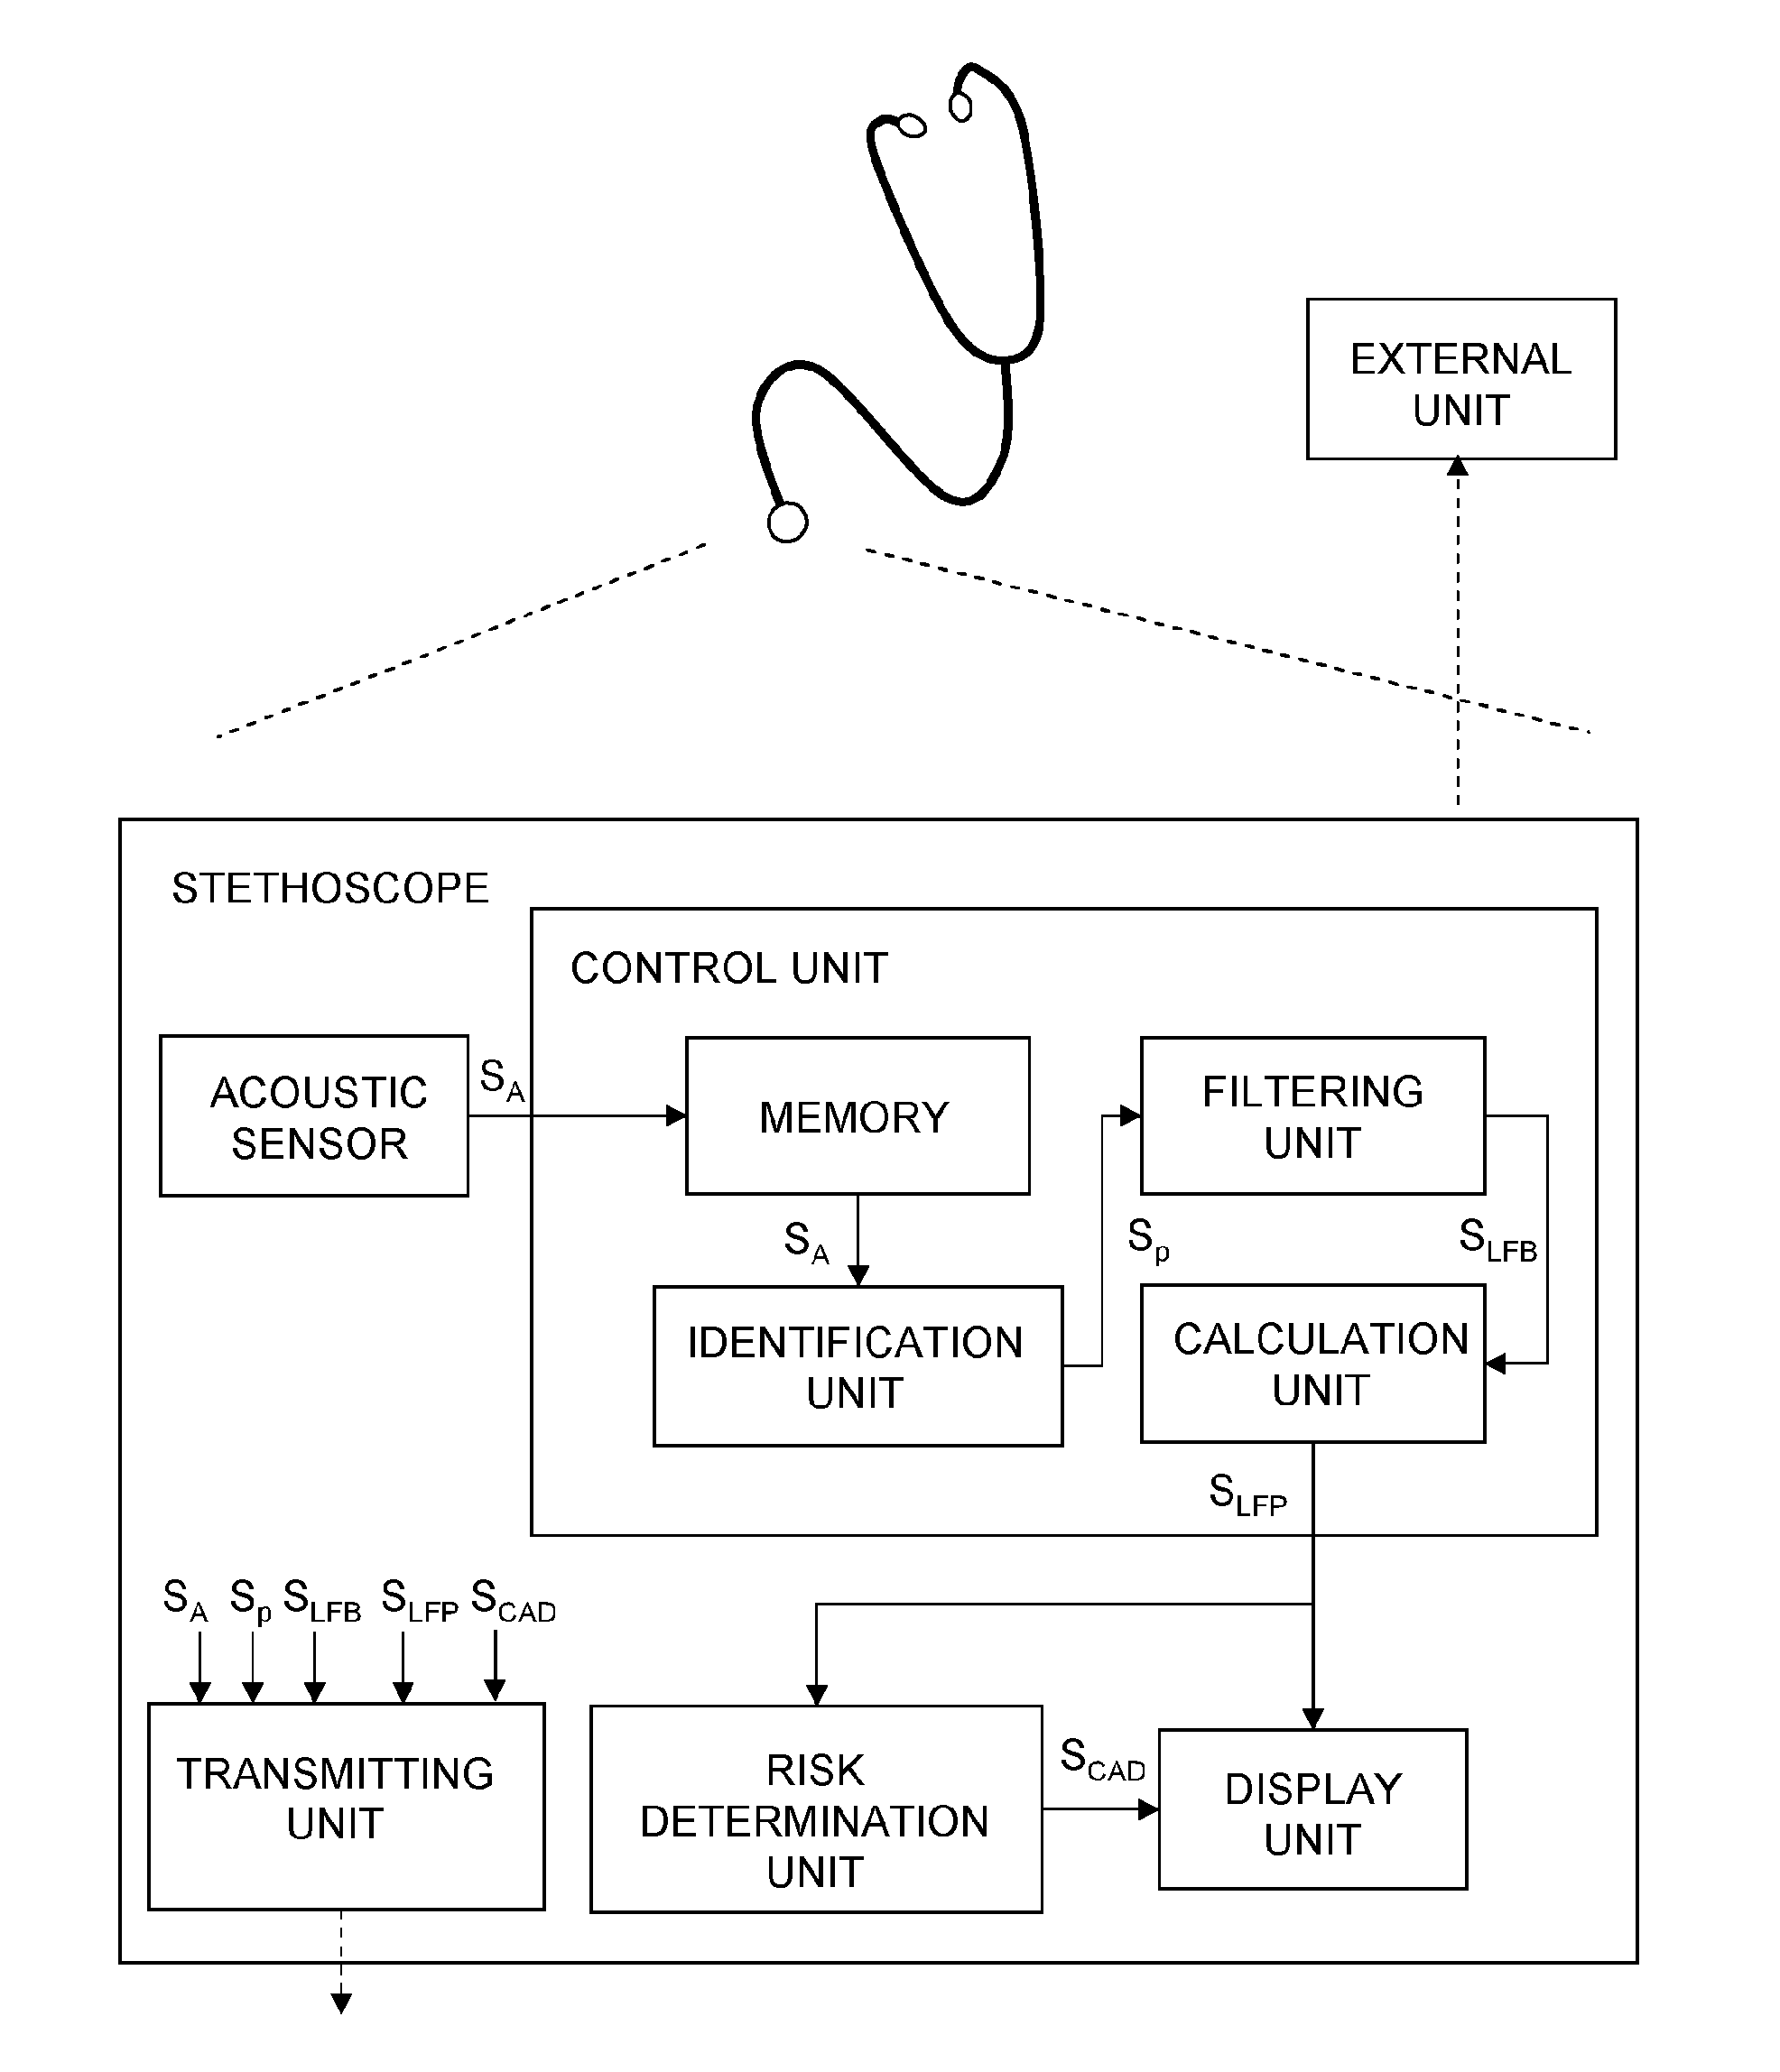 System and method for indicating coronary artery disease risk based on low and high frequency bands